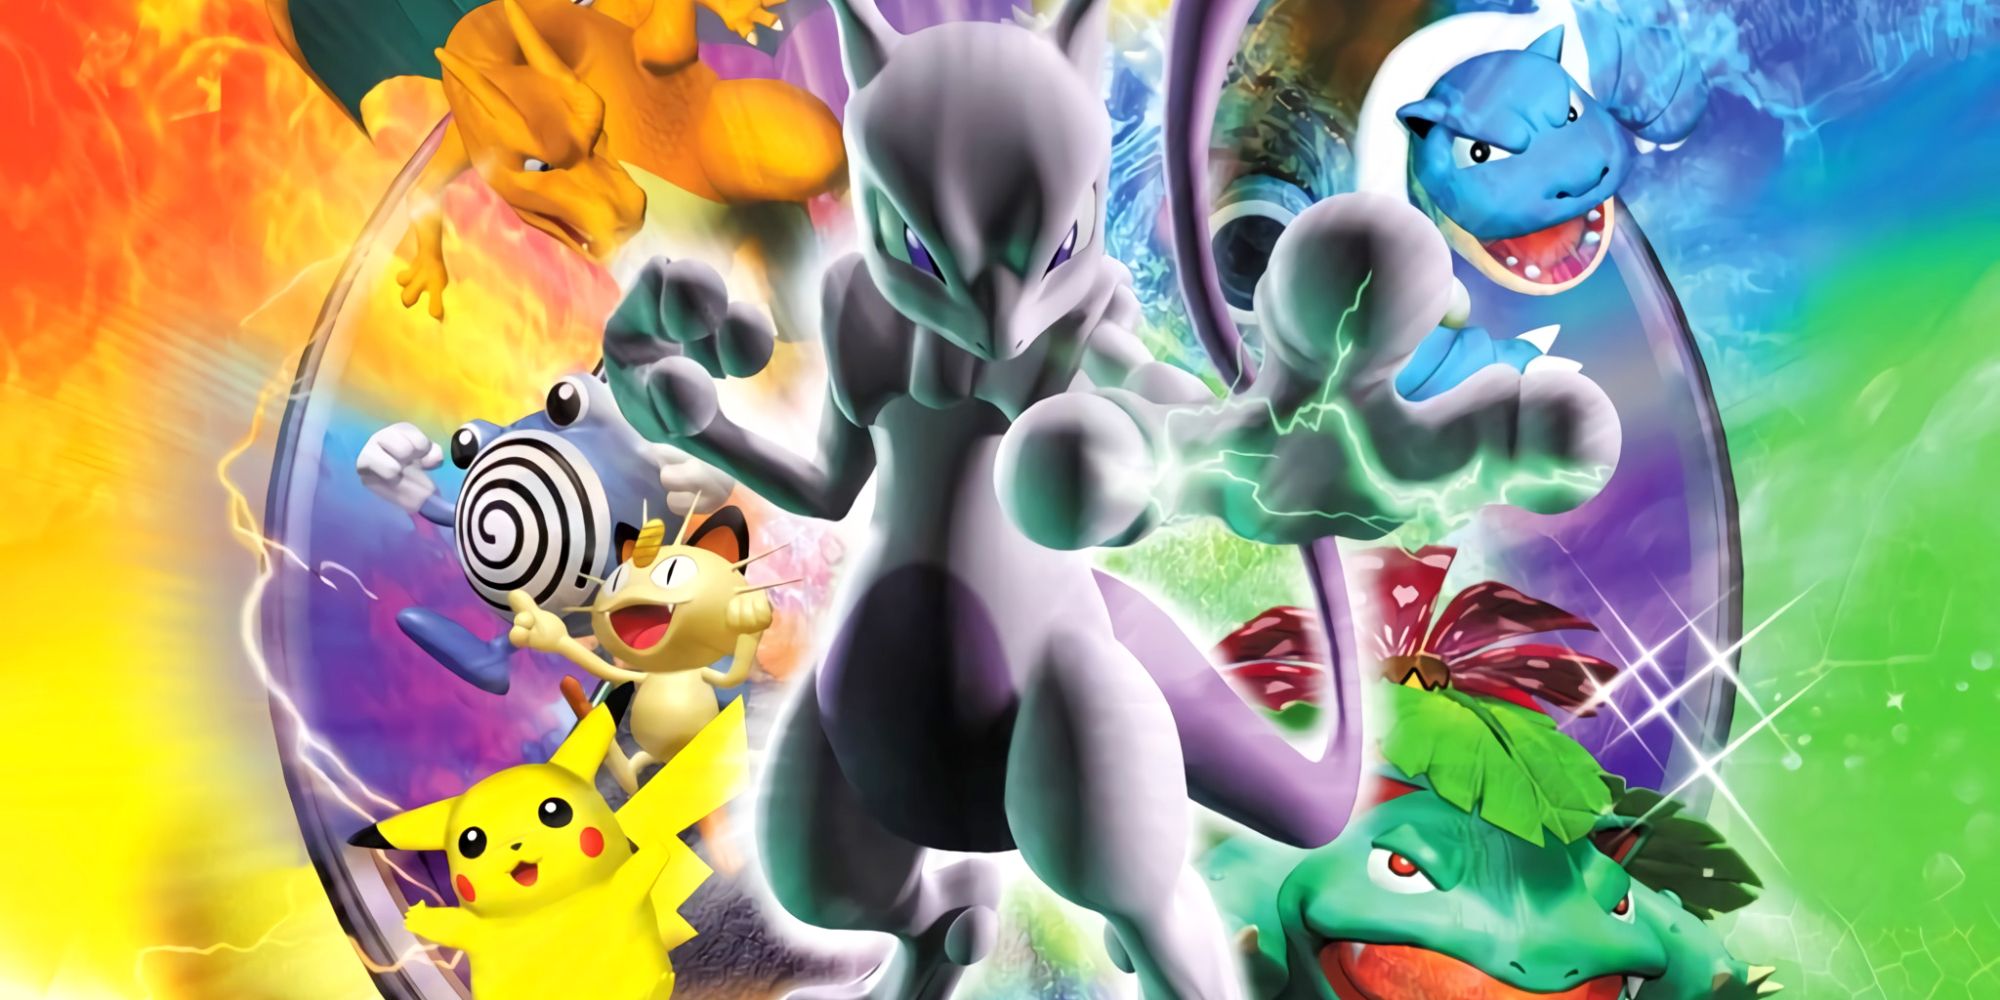 An image collecting many Pokémon available in Pokémon Stadium's roster, with Mewtwo in the middle surrounded by - in clockwise order from the top right - Blastoise, Venusaur, Pikachu, Meowth, Poliwhirl, and Charizard.